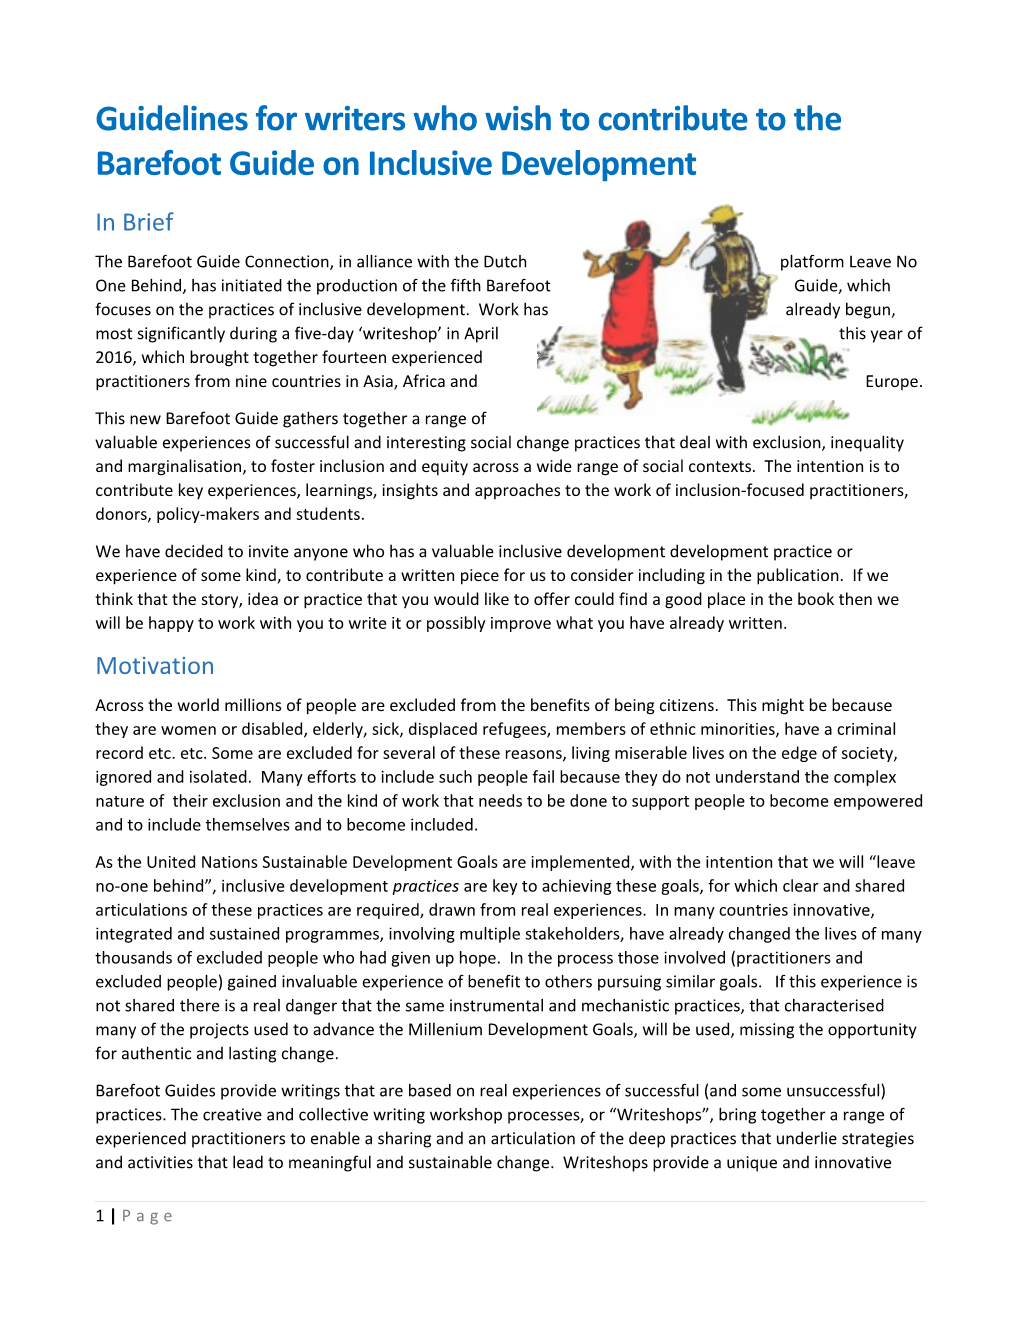 Guidelines for Writers Who Wish to Contribute to the Barefoot Guide on Inclusive Development